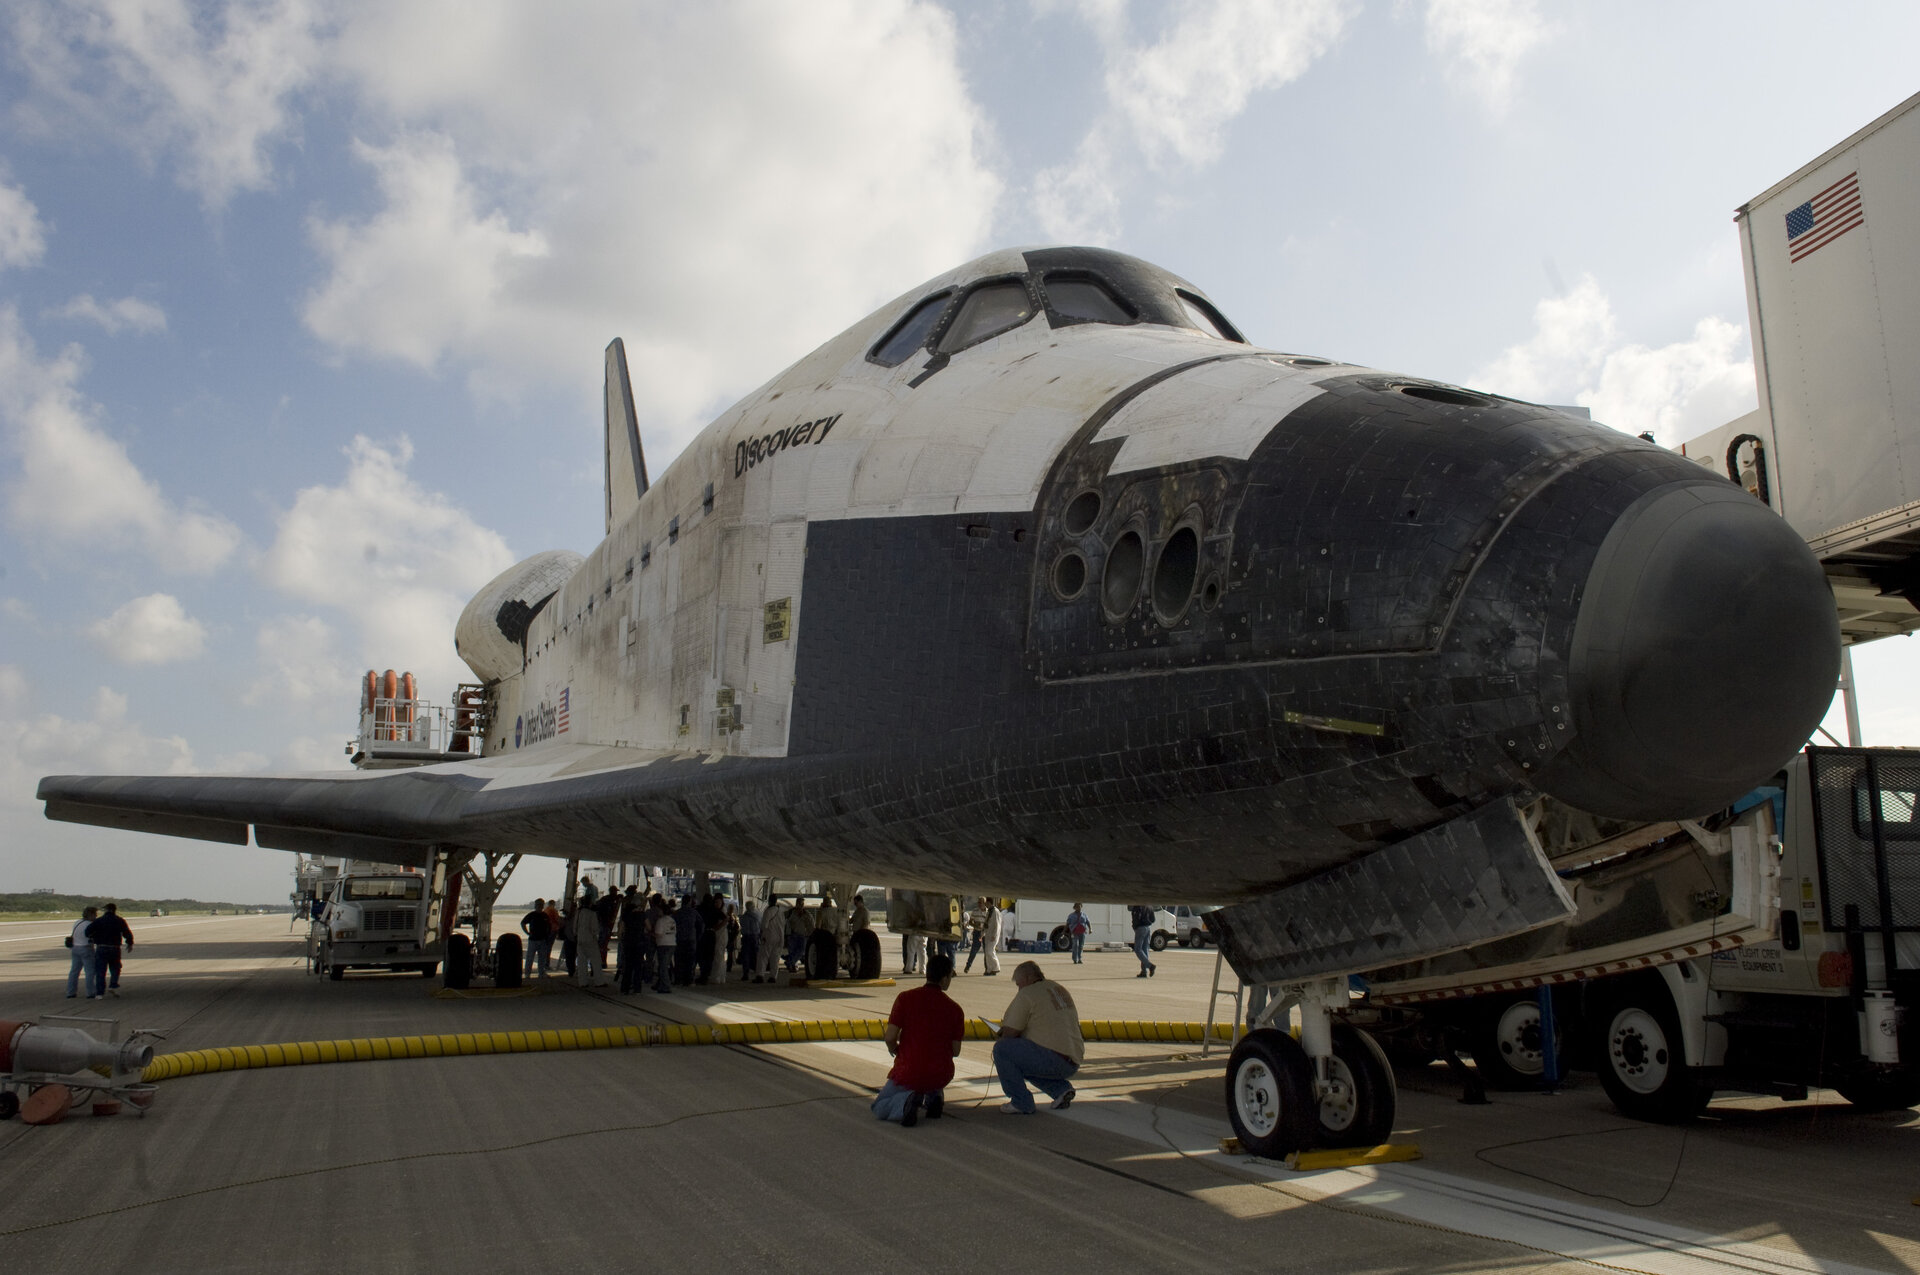 Space Shuttle Discovery lands at Kennedy Space Center, Florida, 7 November 2007.